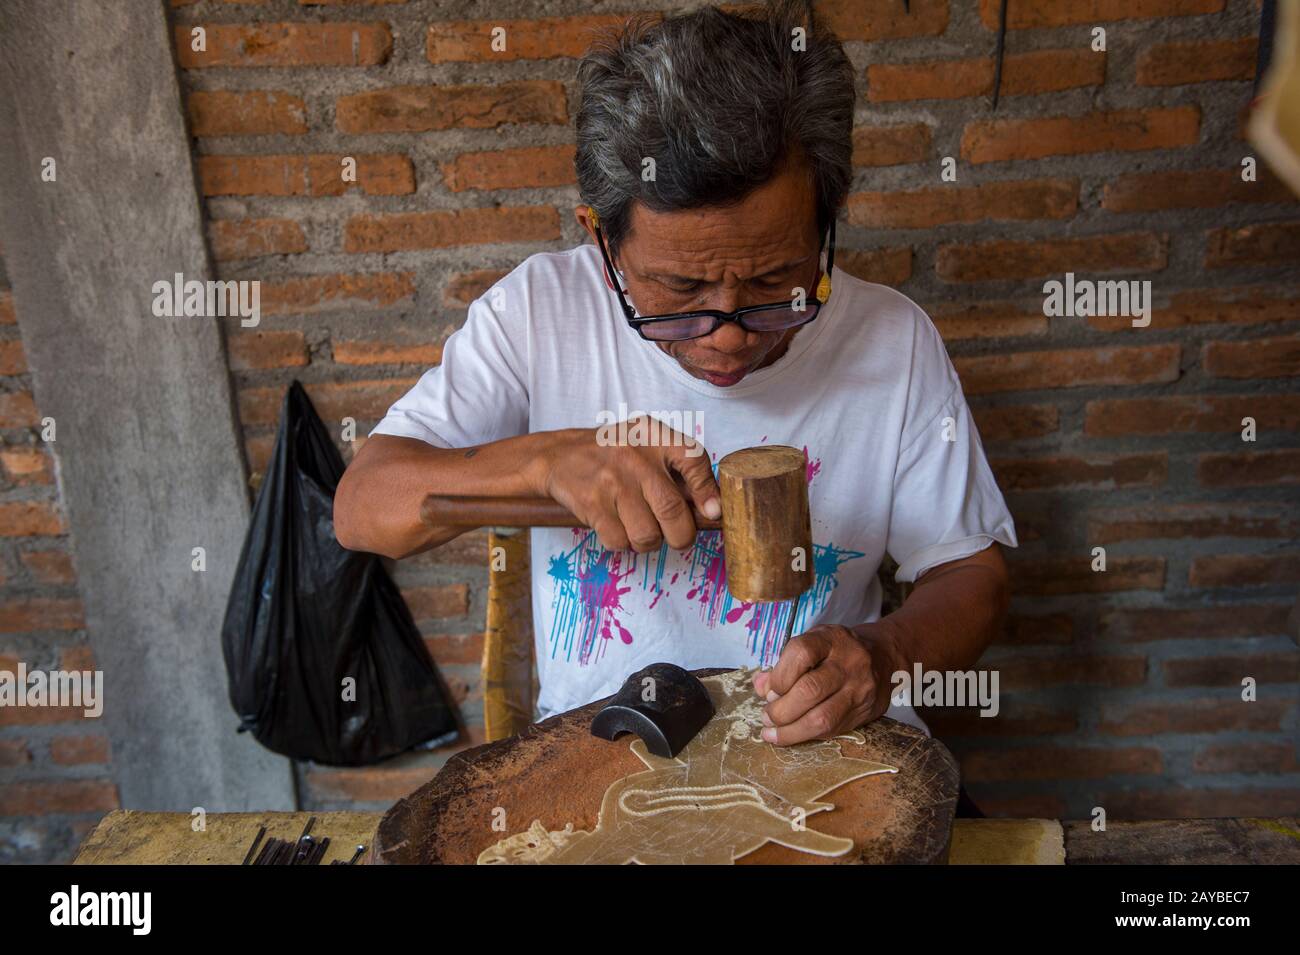 A man is making traditional Javanese wayang kulit (shadow puppet) out of leather in Yogyakarta, Java, Indonesia. Stock Photo